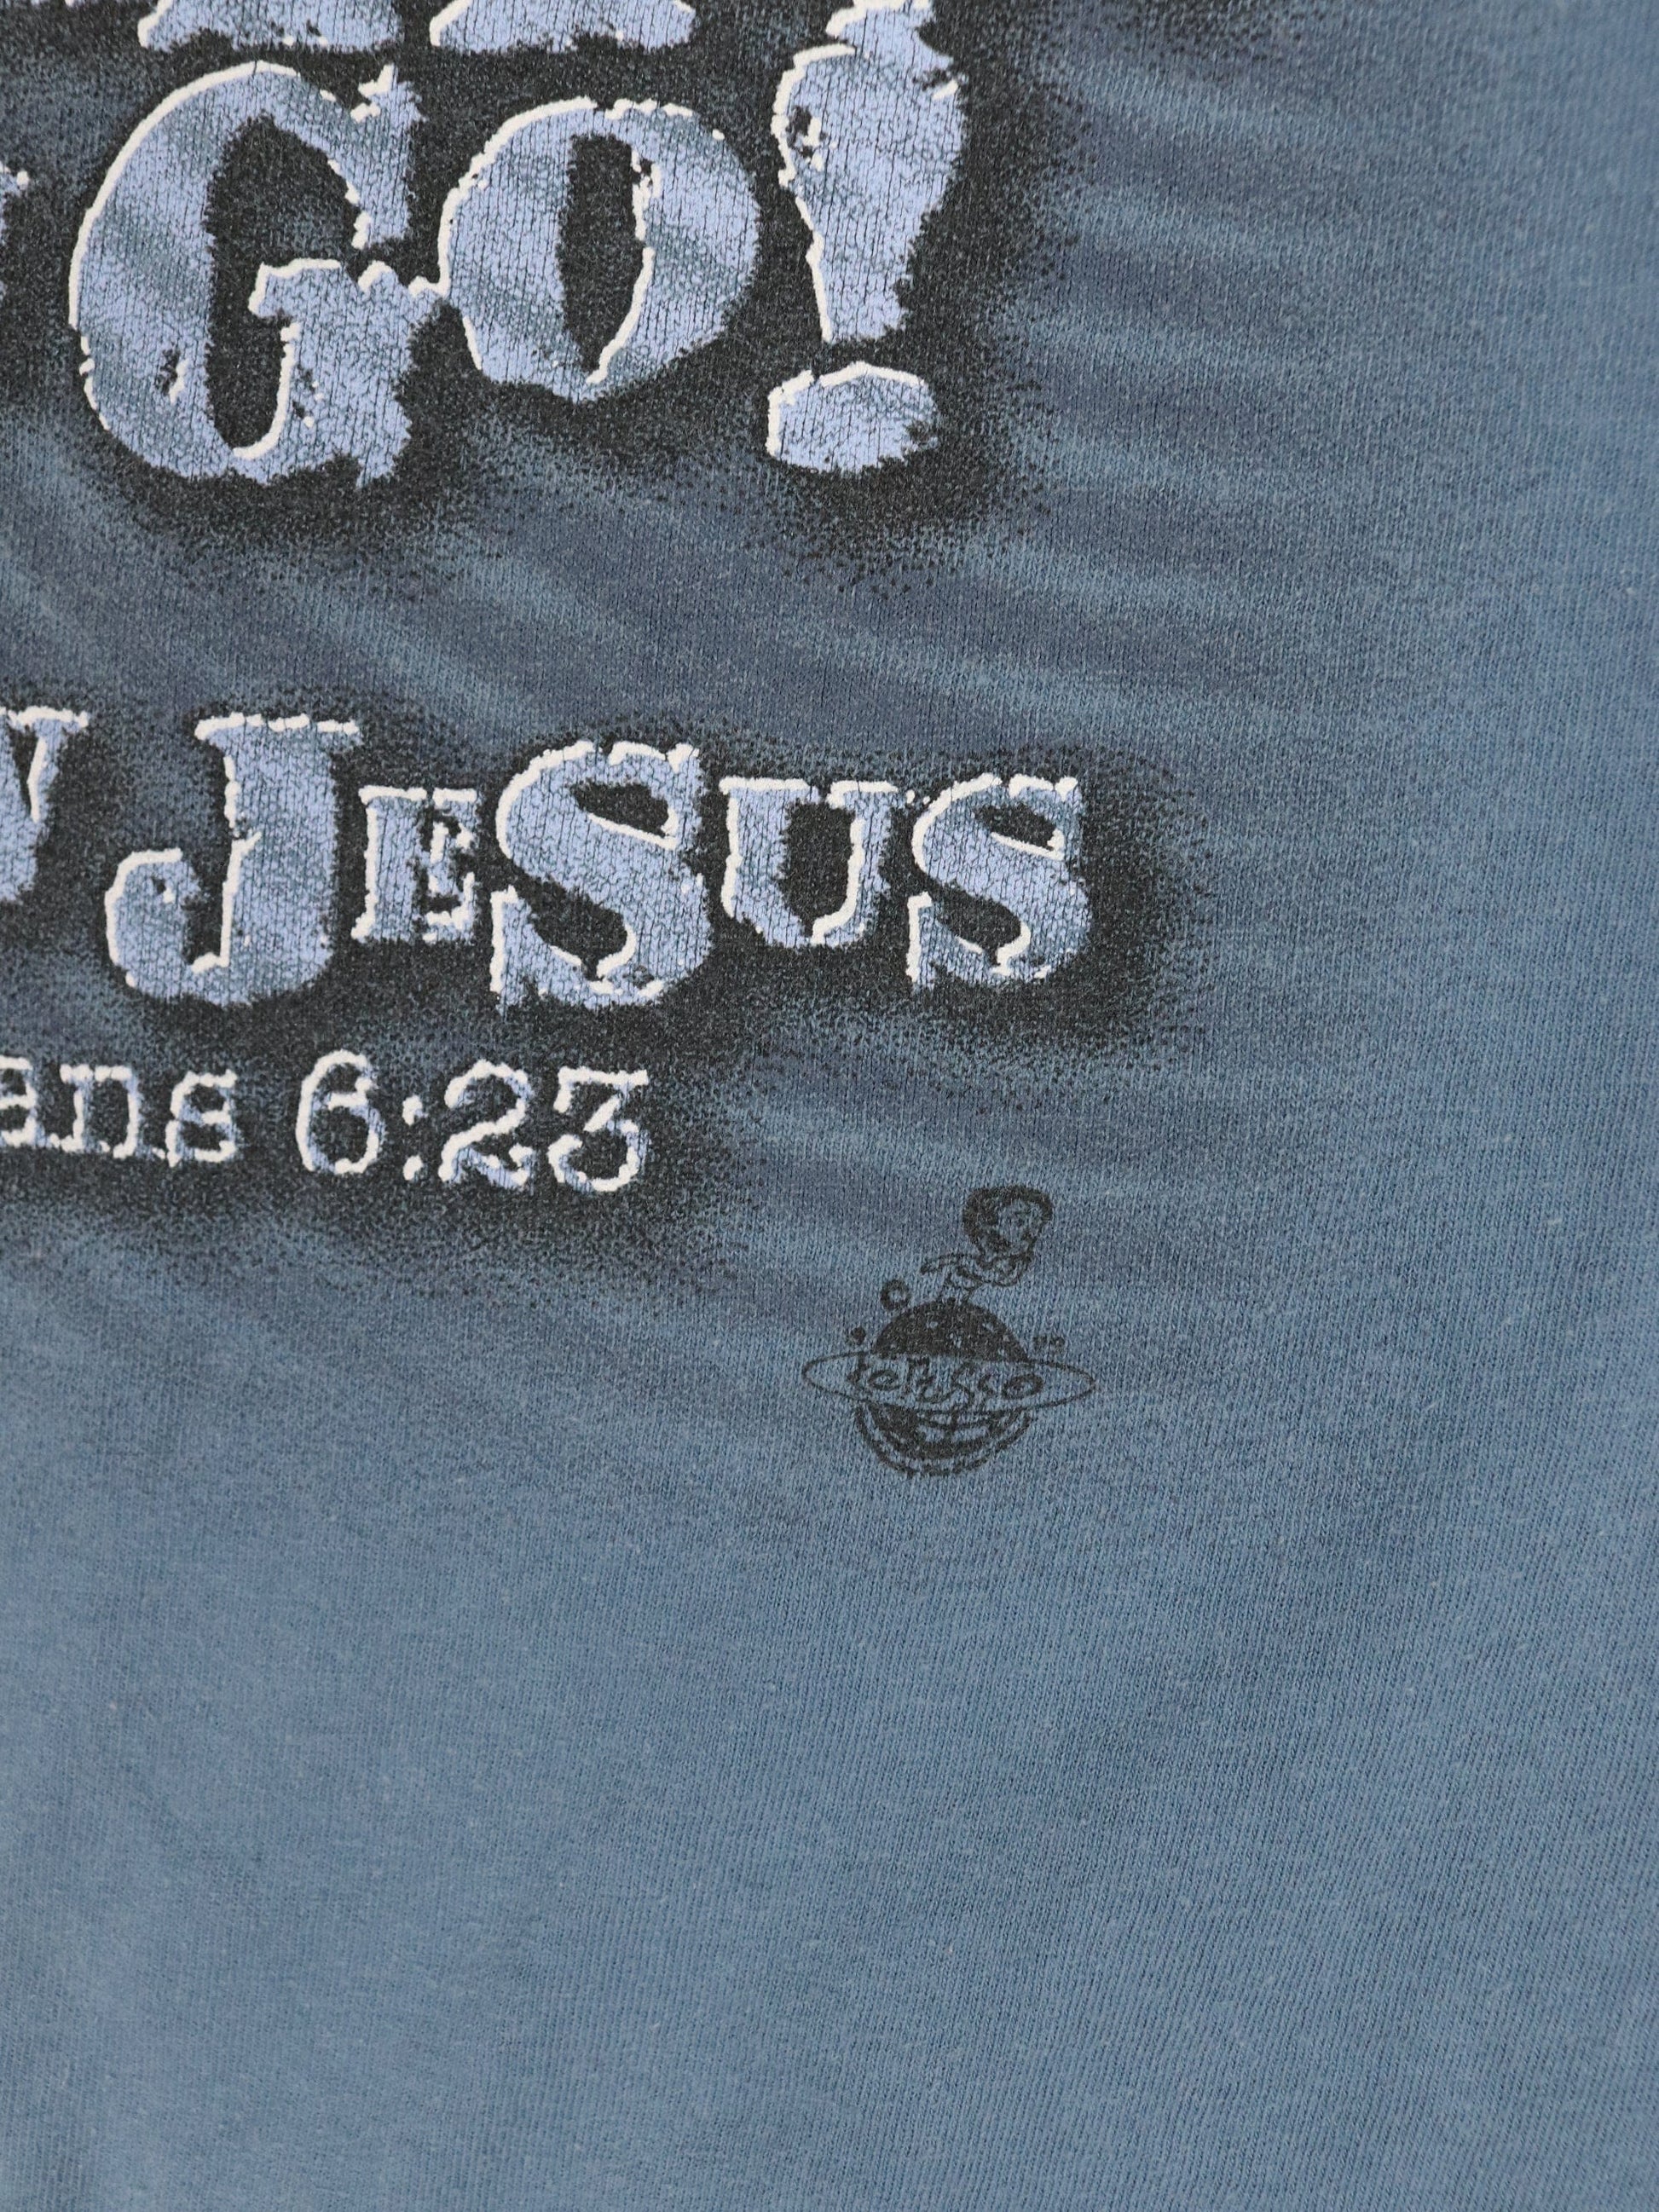 Other T-Shirts & Tank Tops Vintage Jesus T Shirt Mens Large Blue Christian Religion Quote